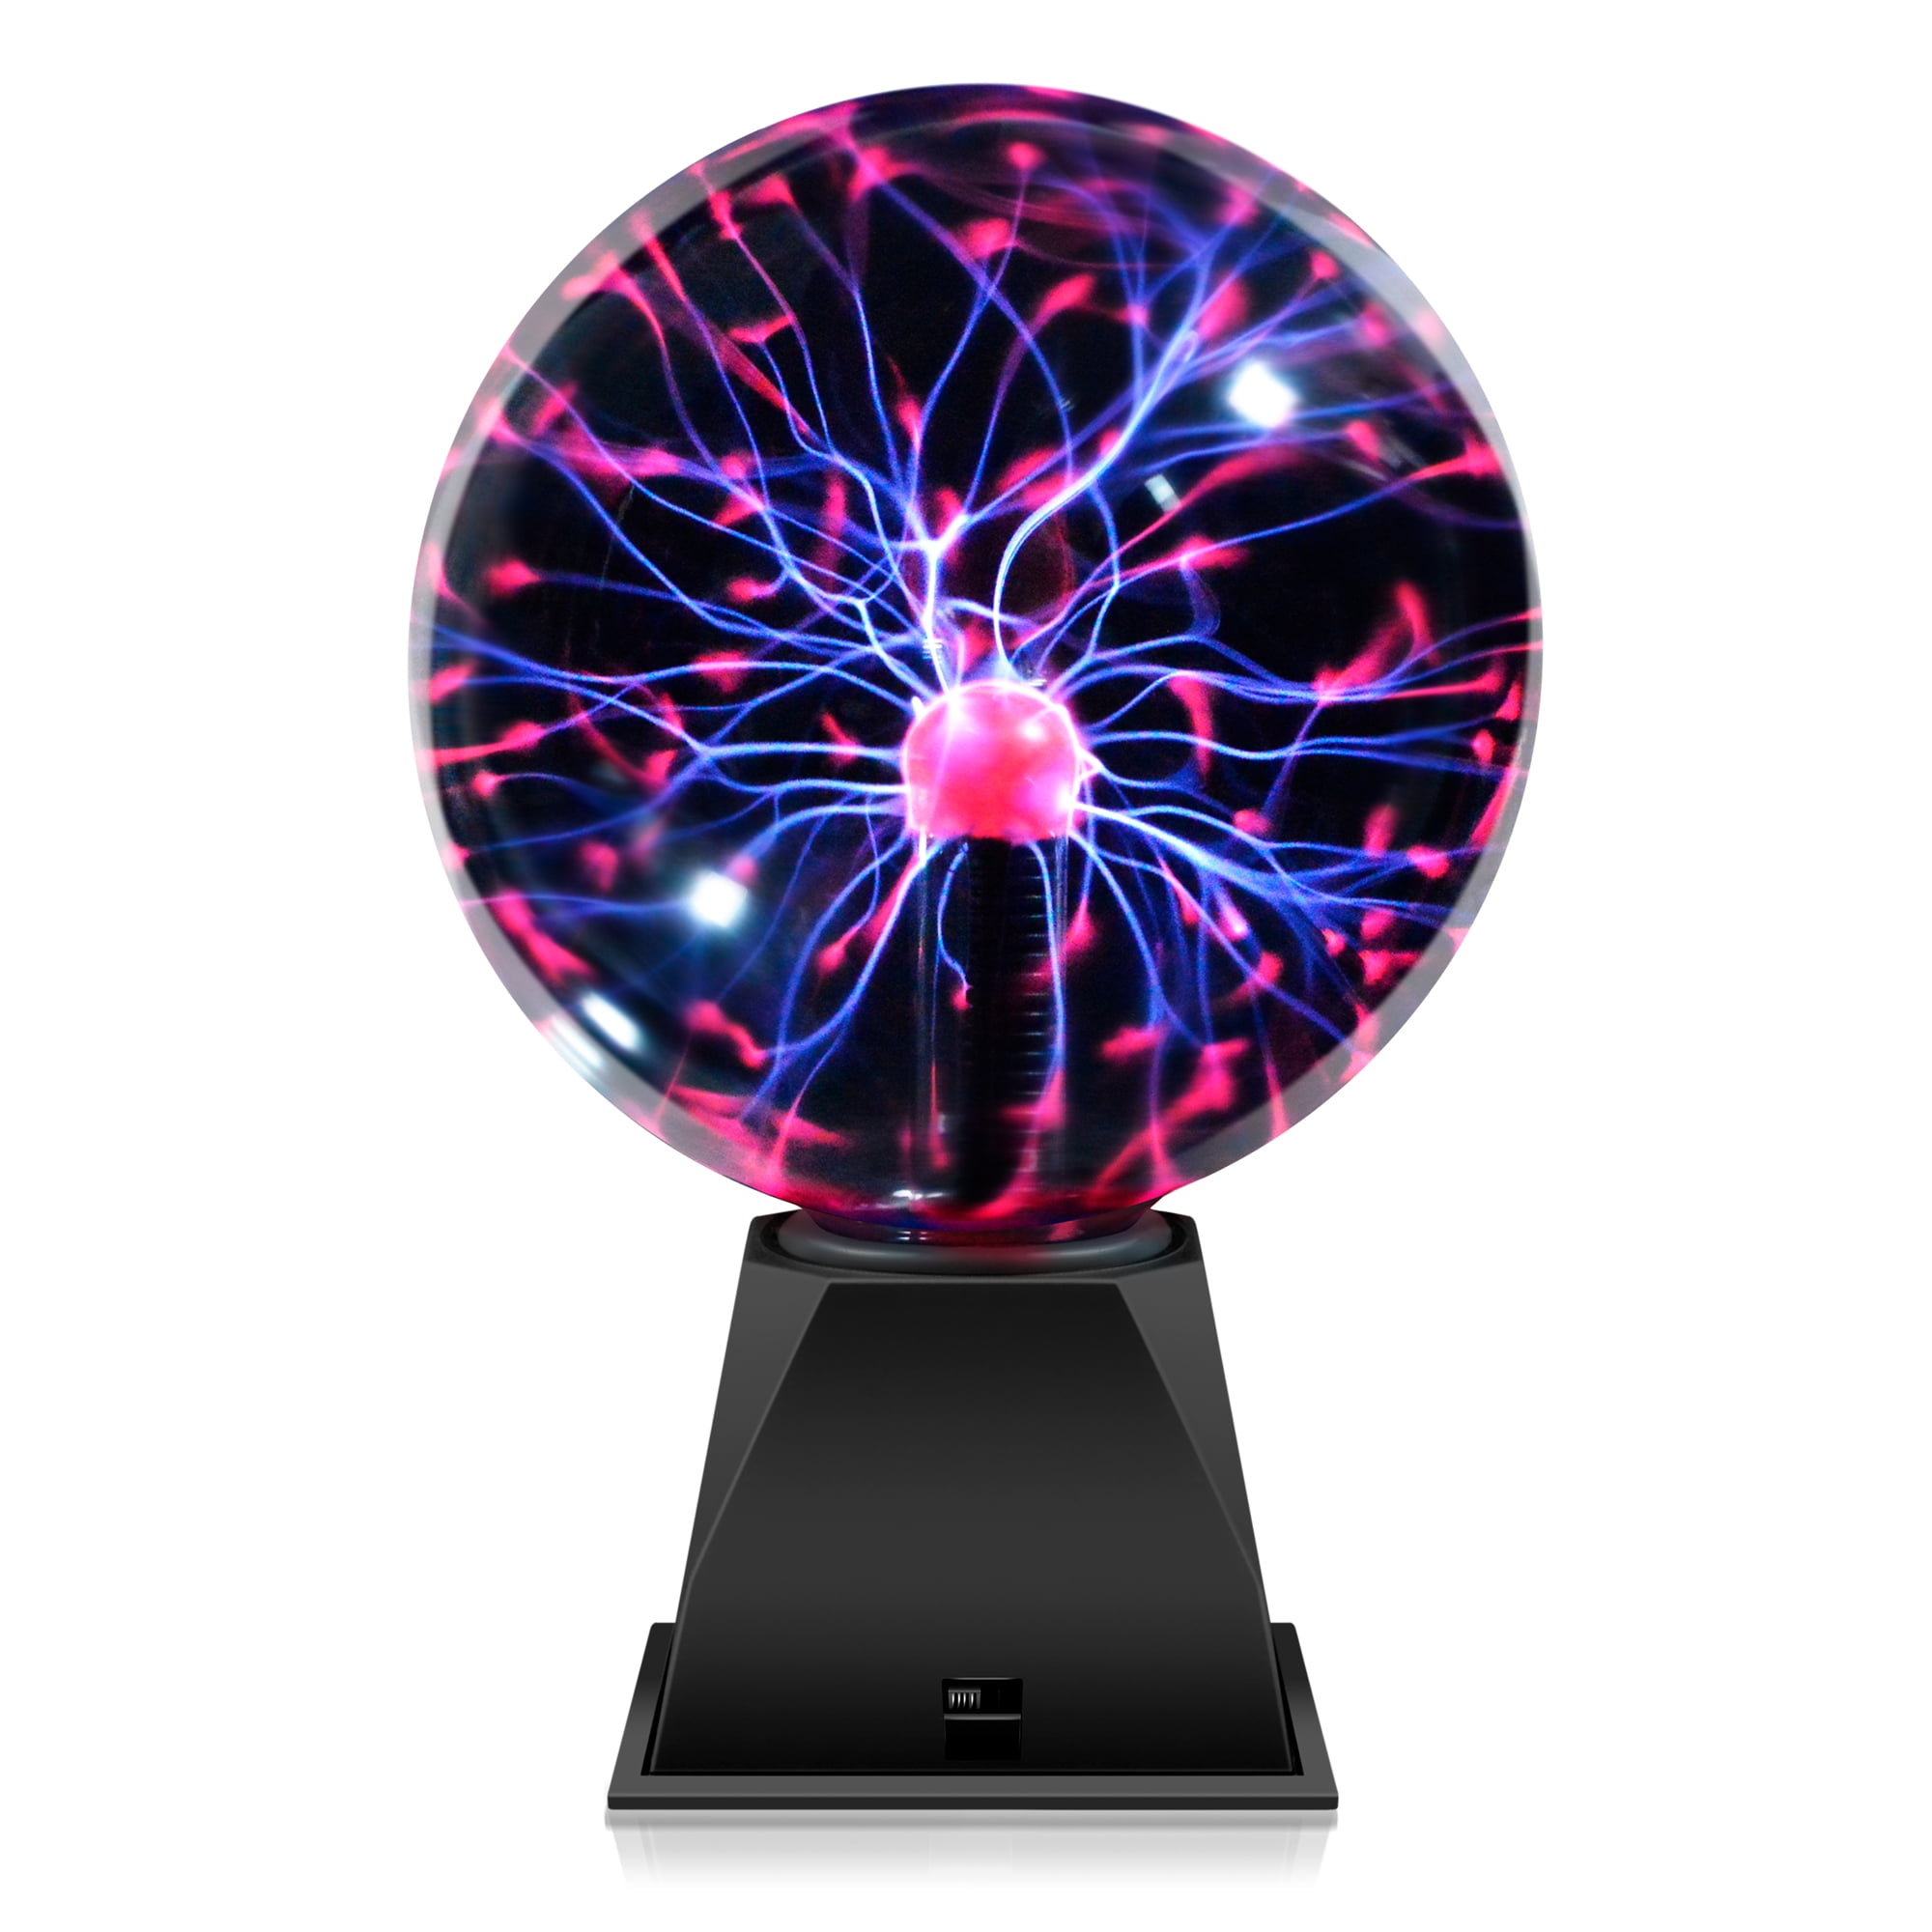 Plasma Ball Science Discovery Desktop Toy Gift Adults Child 